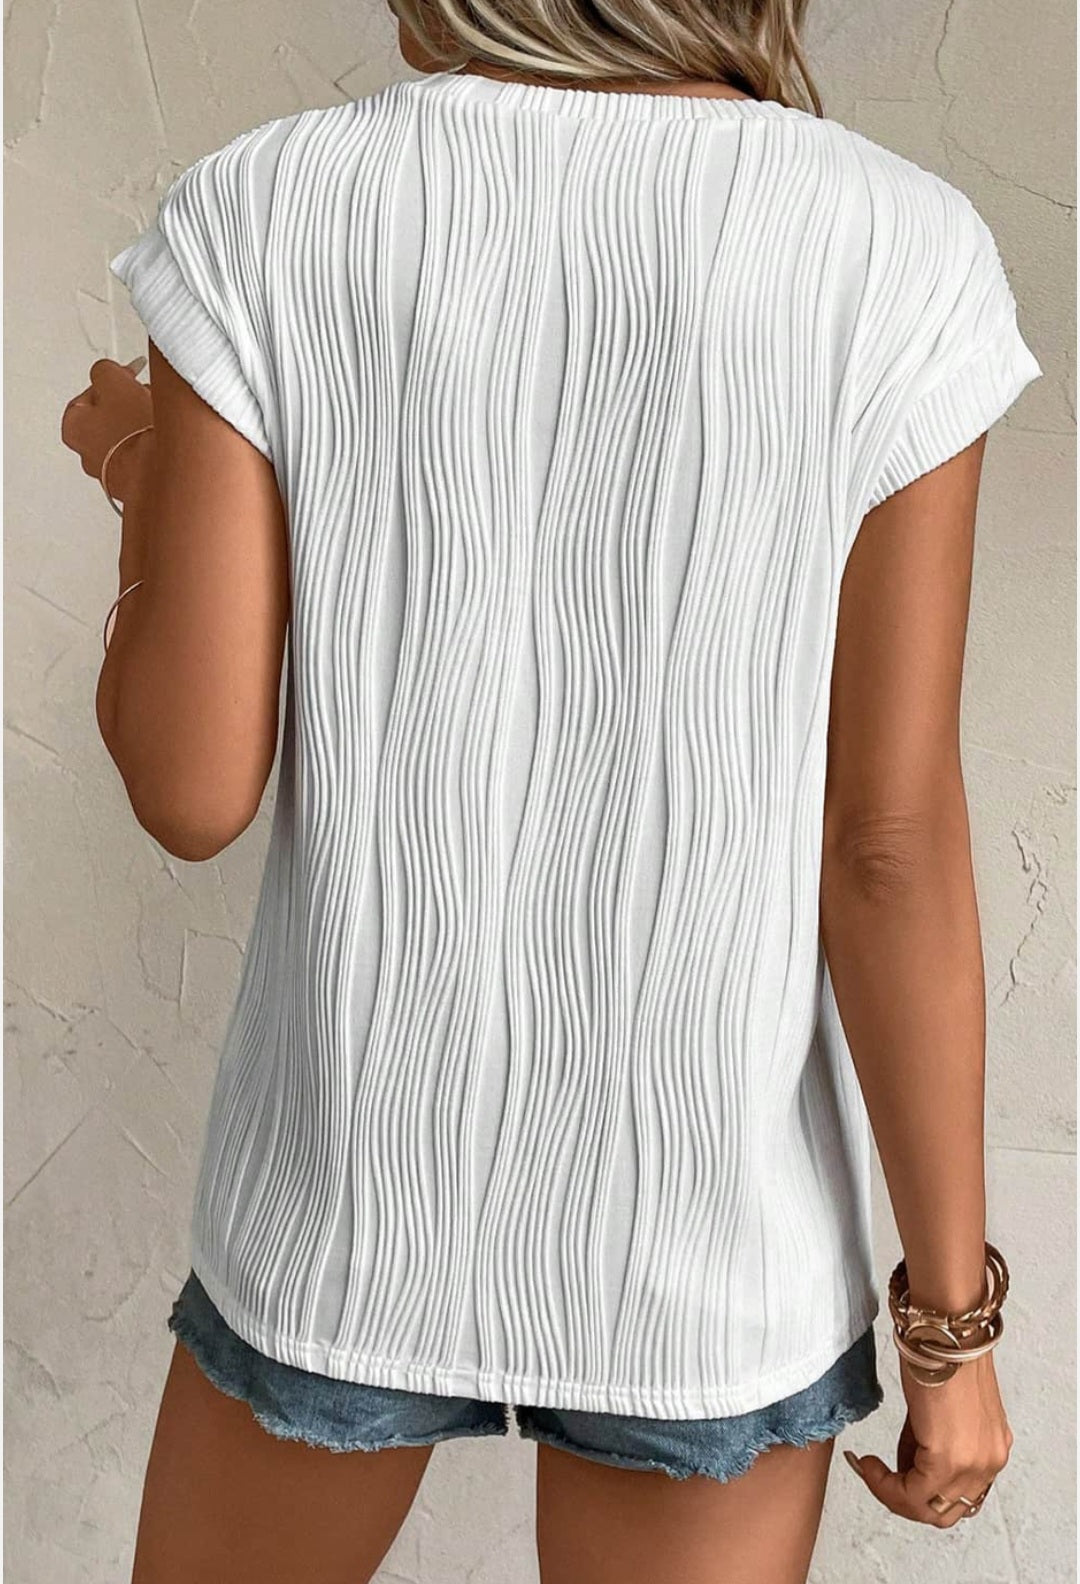 Tony Ivory textured top small to 2xl